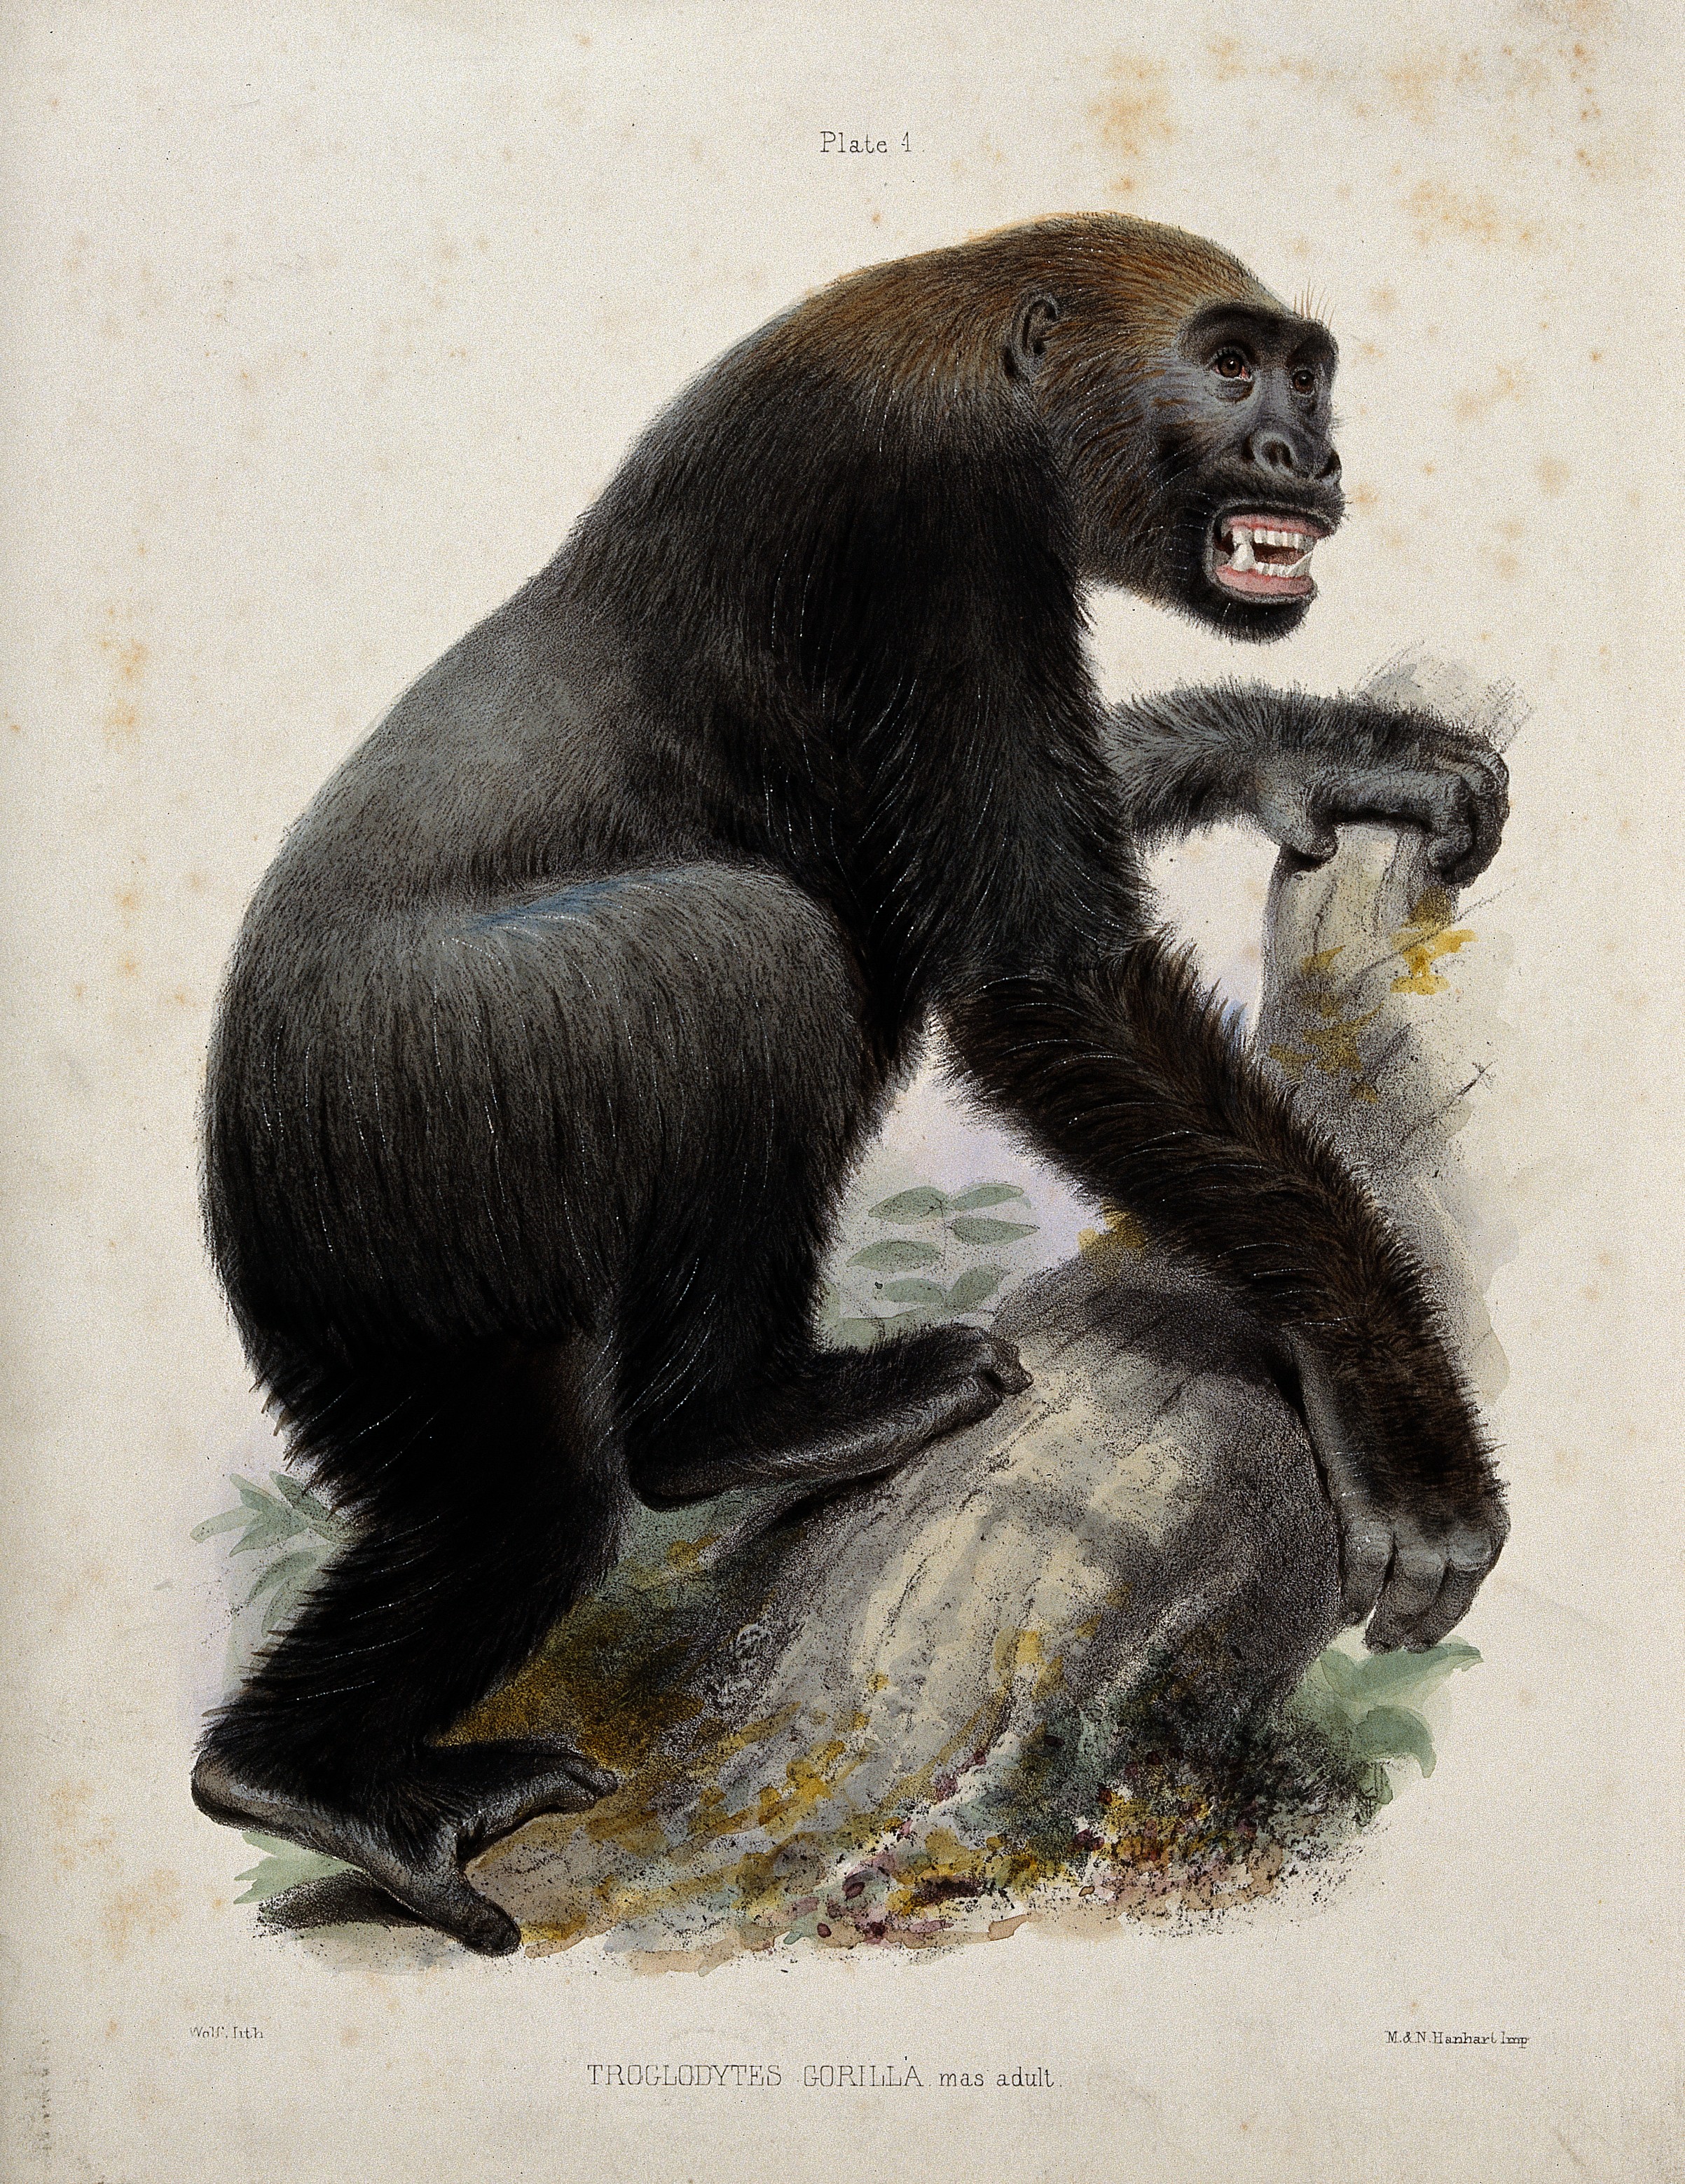 A large male gorilla. Coloured lithograph by J Wolf. Wellcome V0021468